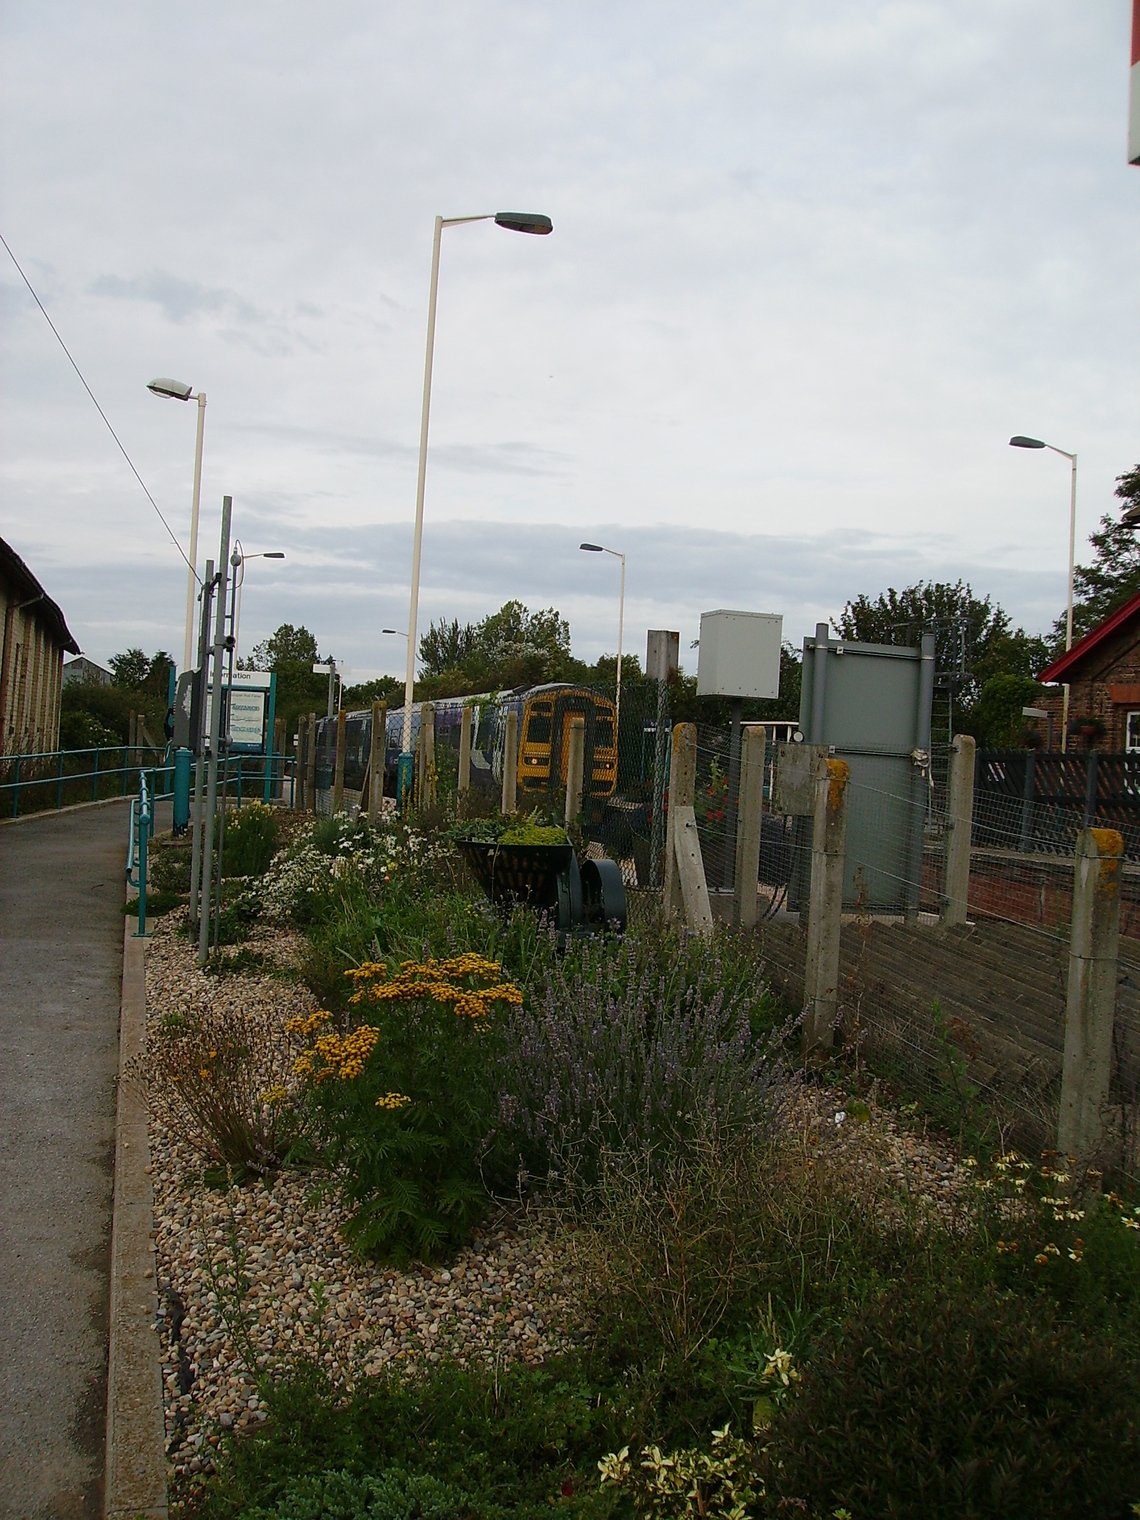 Entrance to the Scarborough Platform in the summer of 2008 at Hunmanby Railway Station